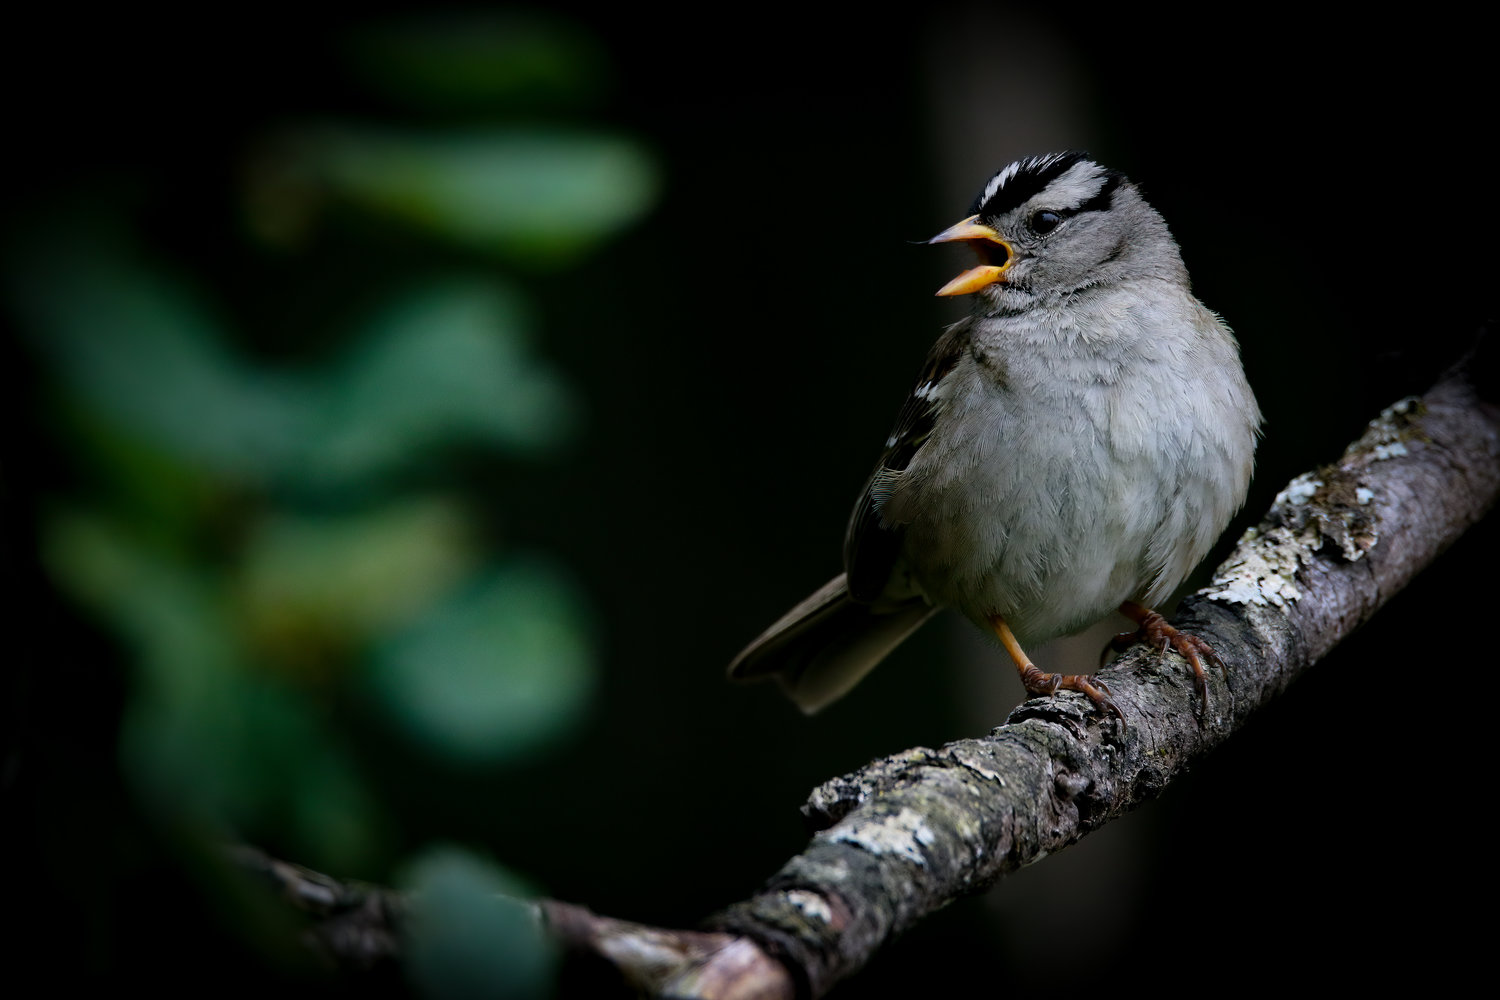 This is the White-crowned Sparrow.